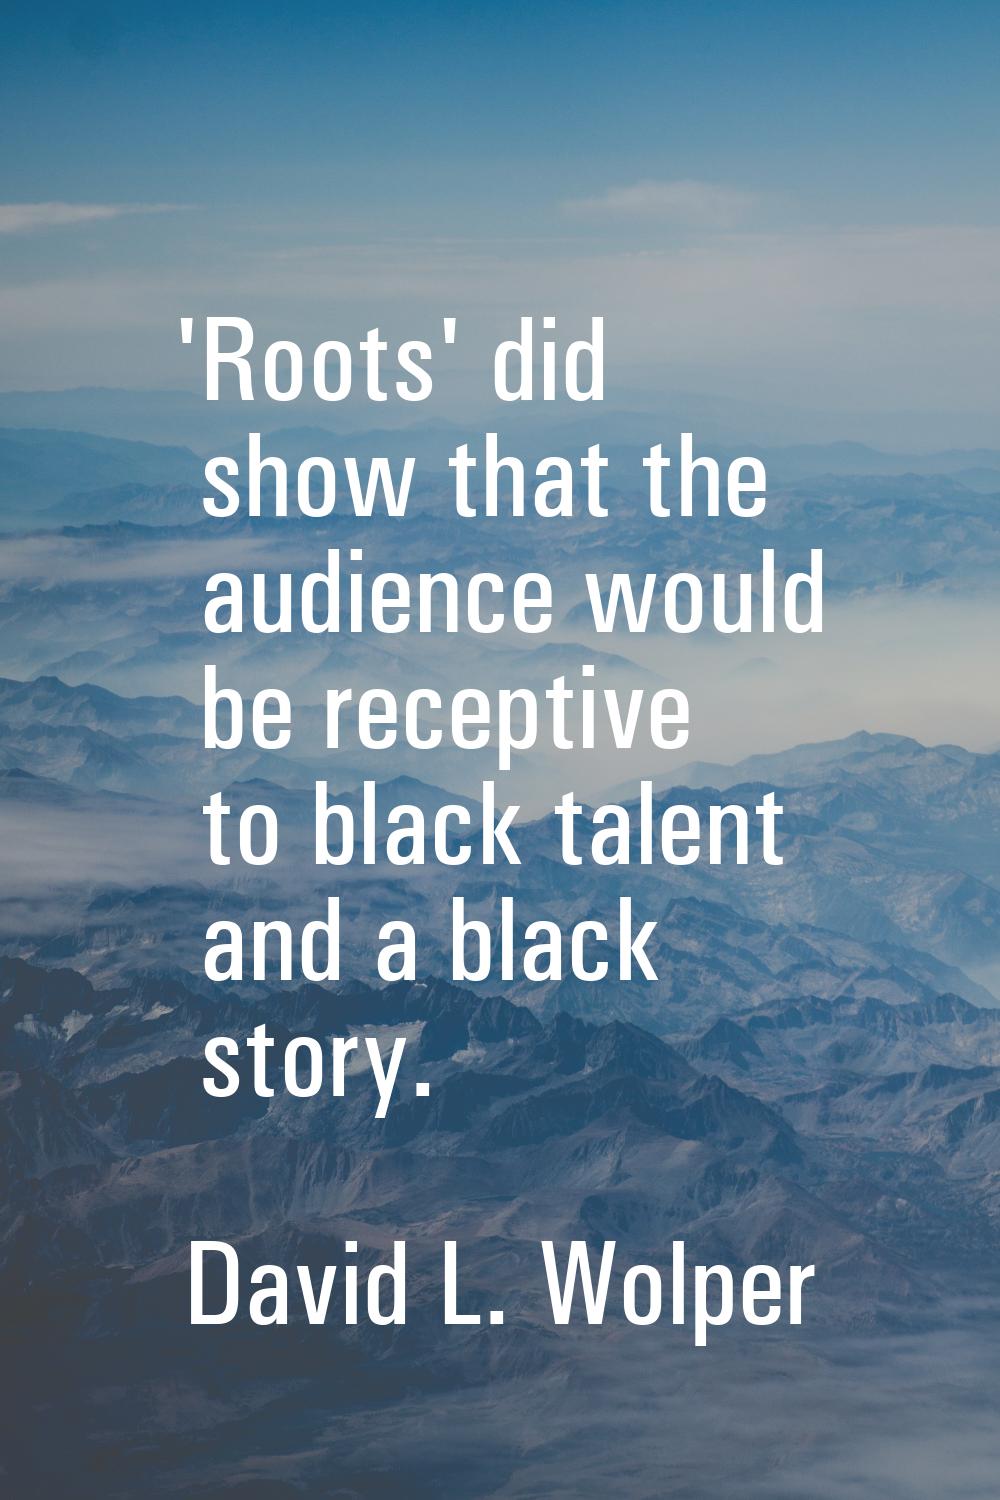 'Roots' did show that the audience would be receptive to black talent and a black story.